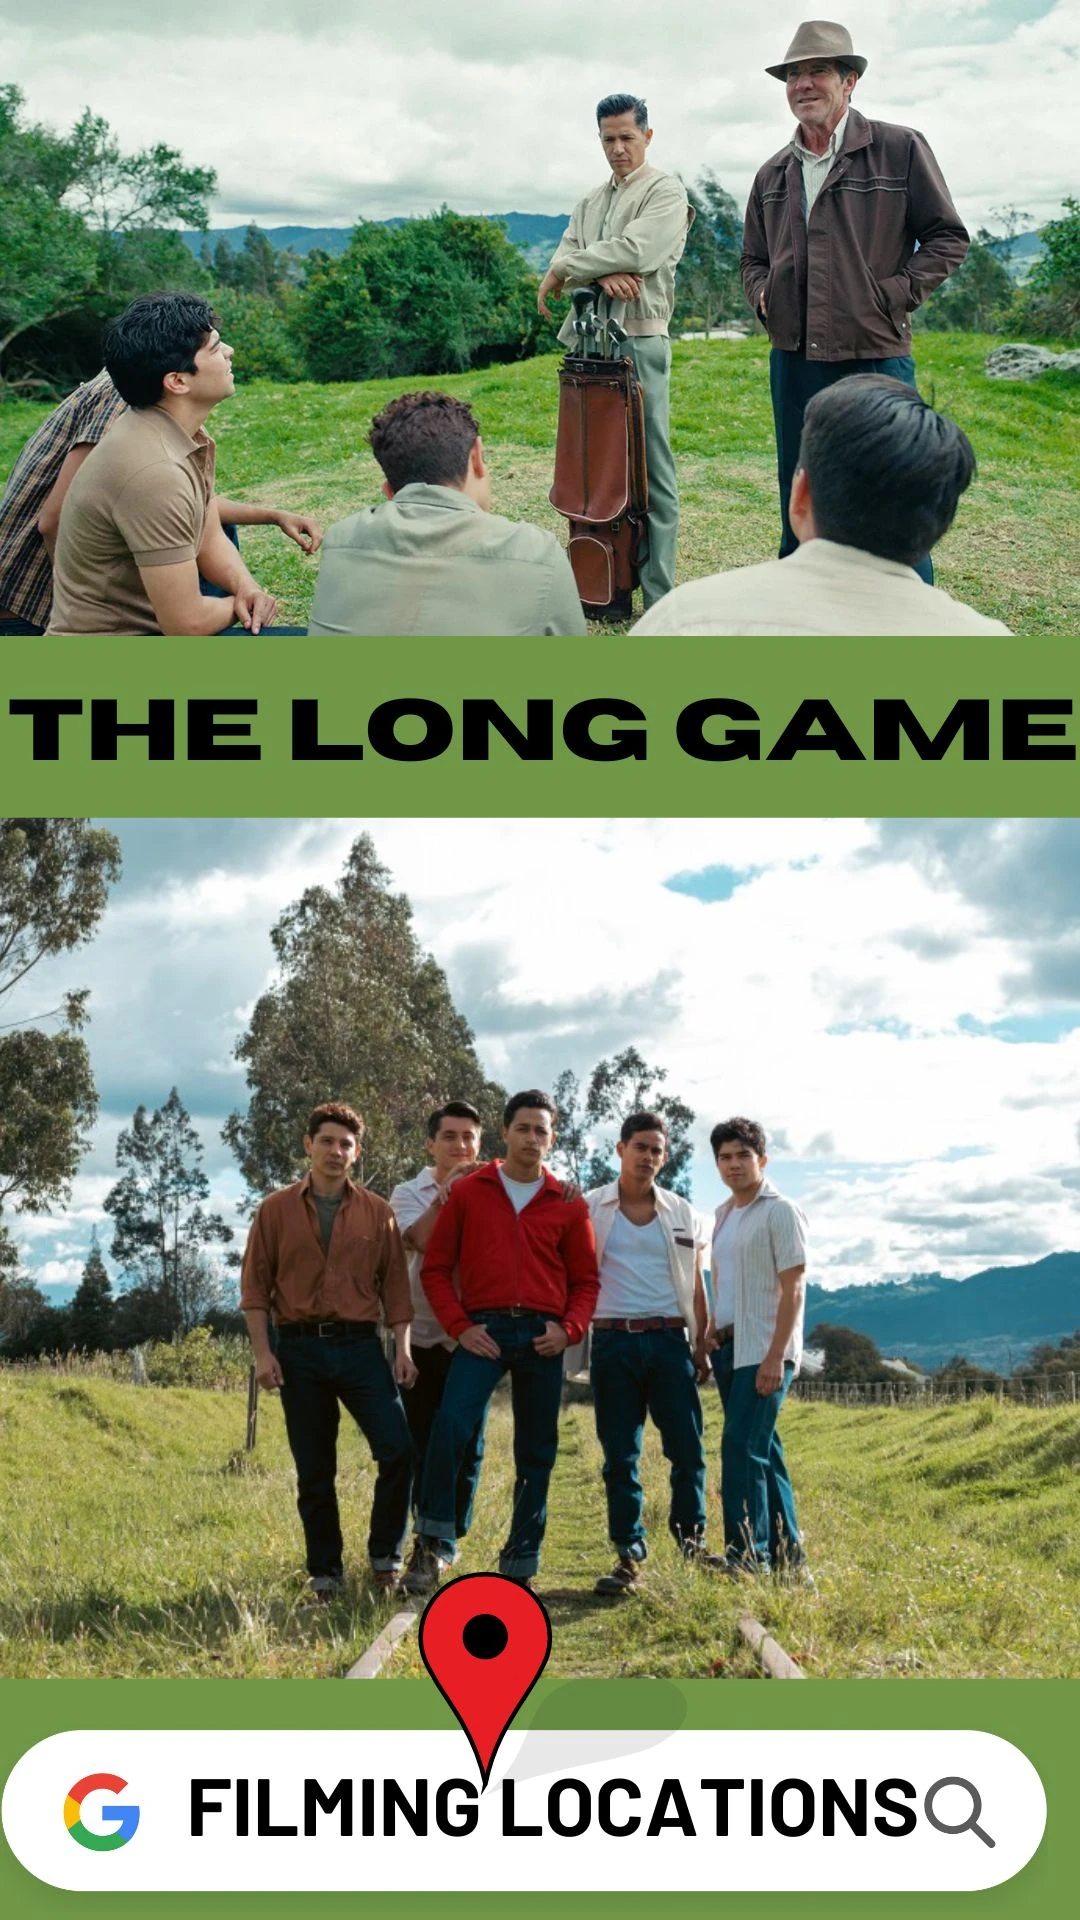 The Long Game Filming Locations